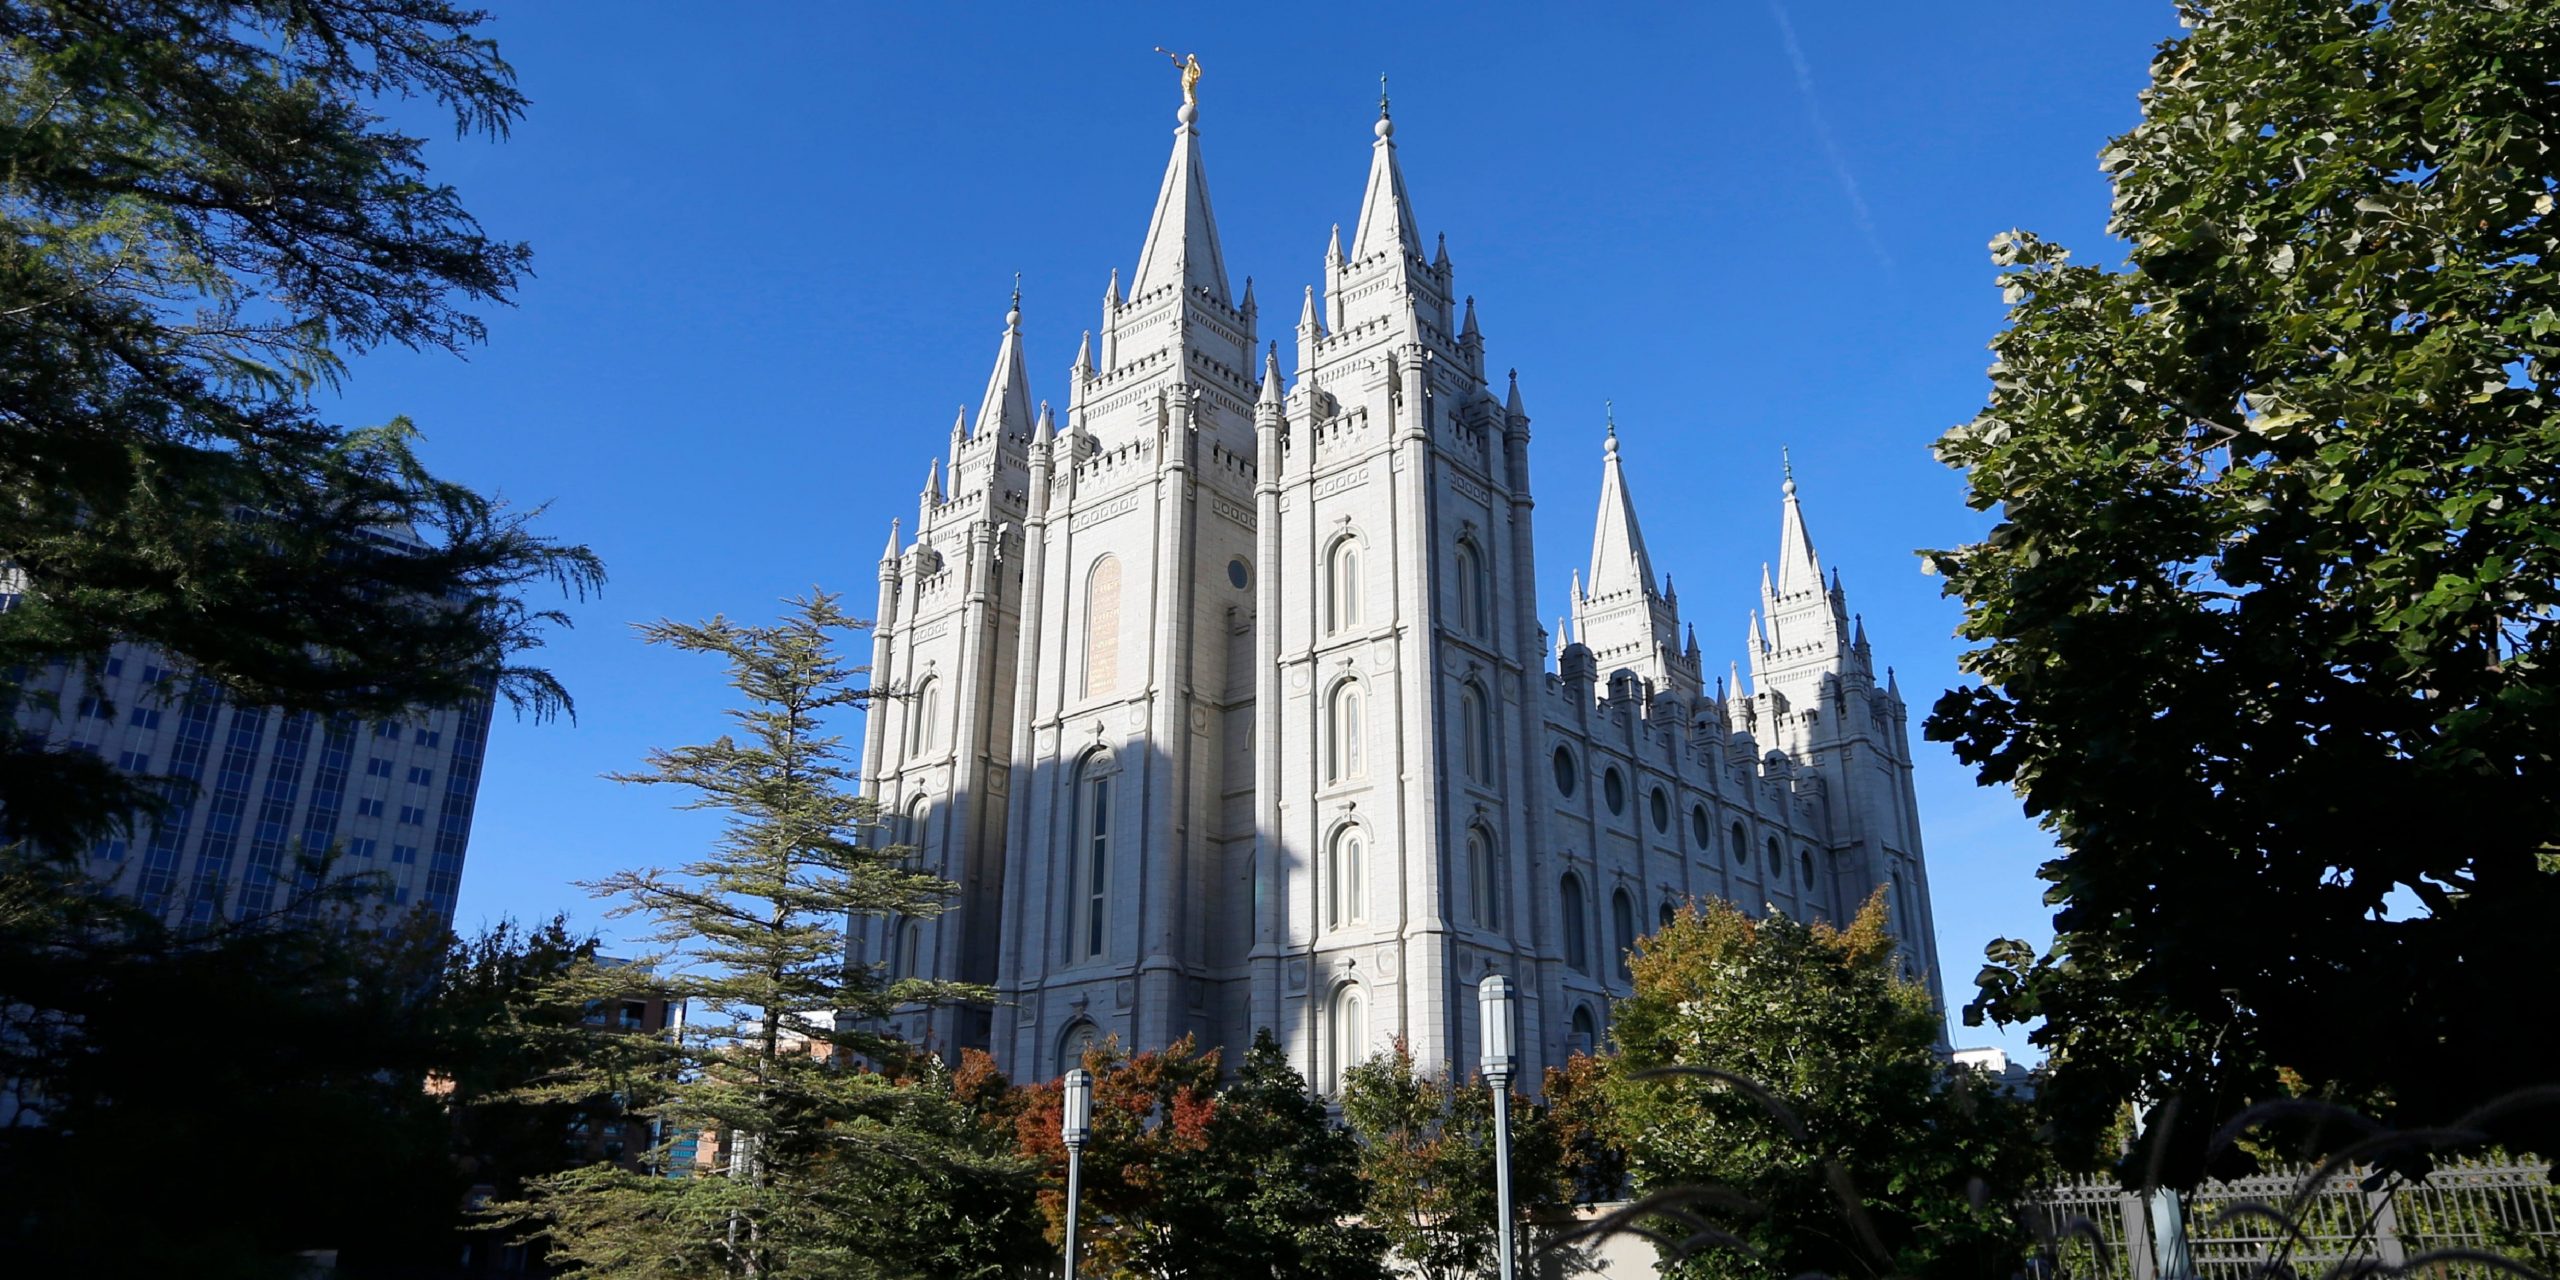 The Salt Lake Temple, a temple of The Church of Jesus Christ of Latter-day Saints on Temple Square in Salt Lake City, Utah.